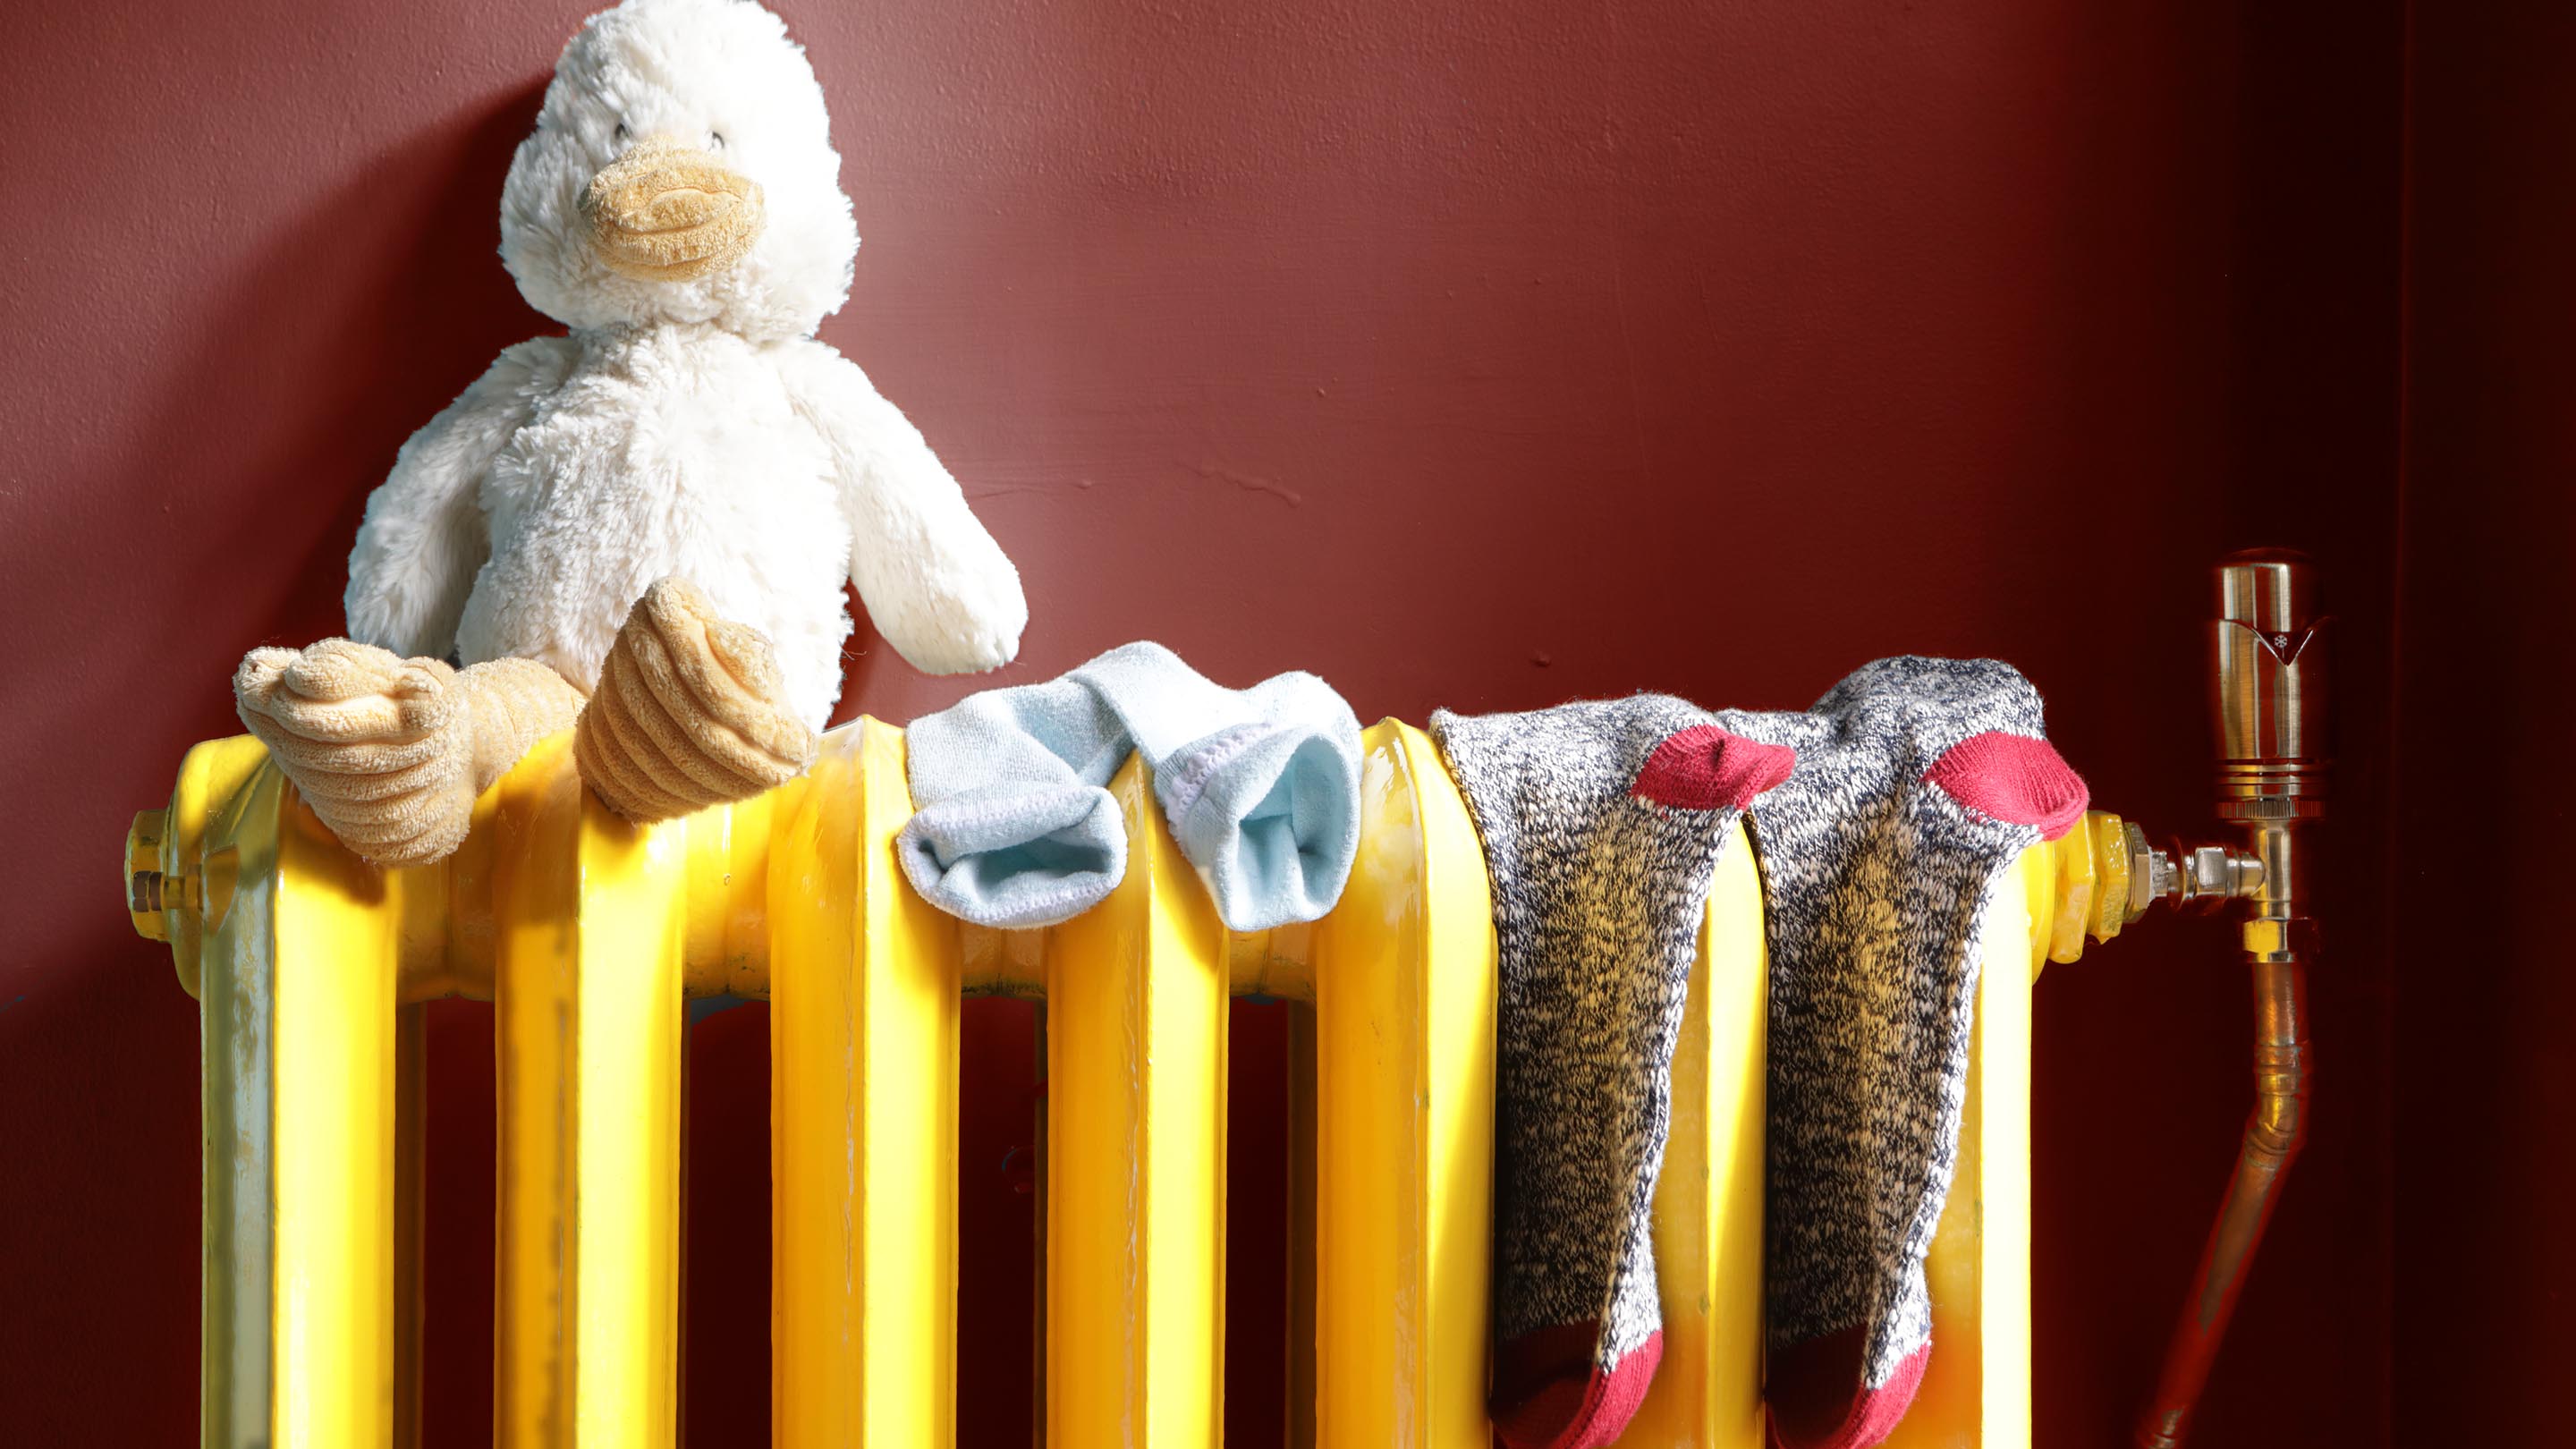 Soft toy on a yellow radiator